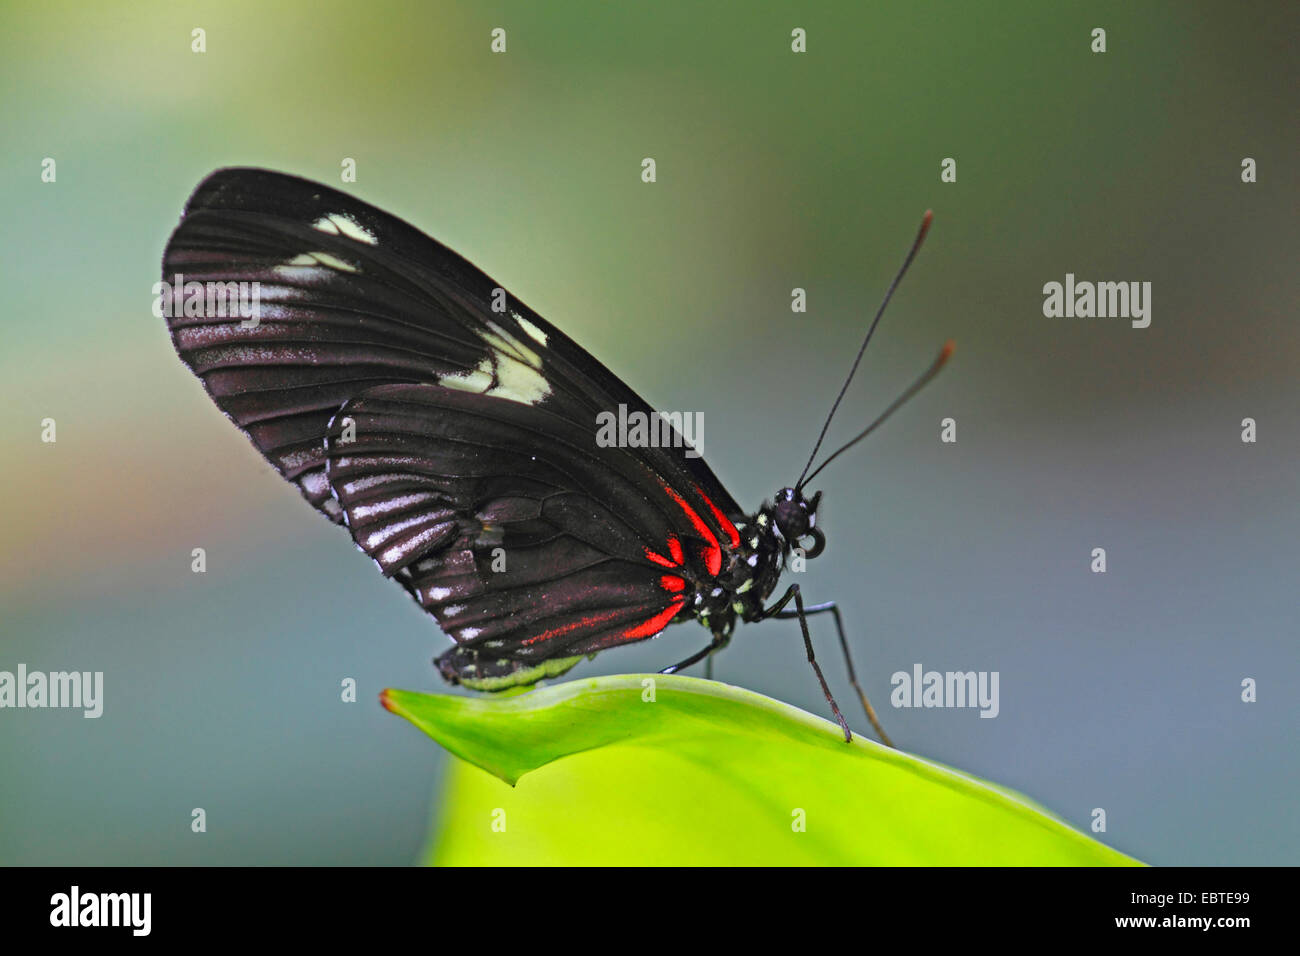 Hecales longwing, passioni flower butterfly, Tiger Longwing (Heliconius hecale), seduto su un impianto Foto Stock